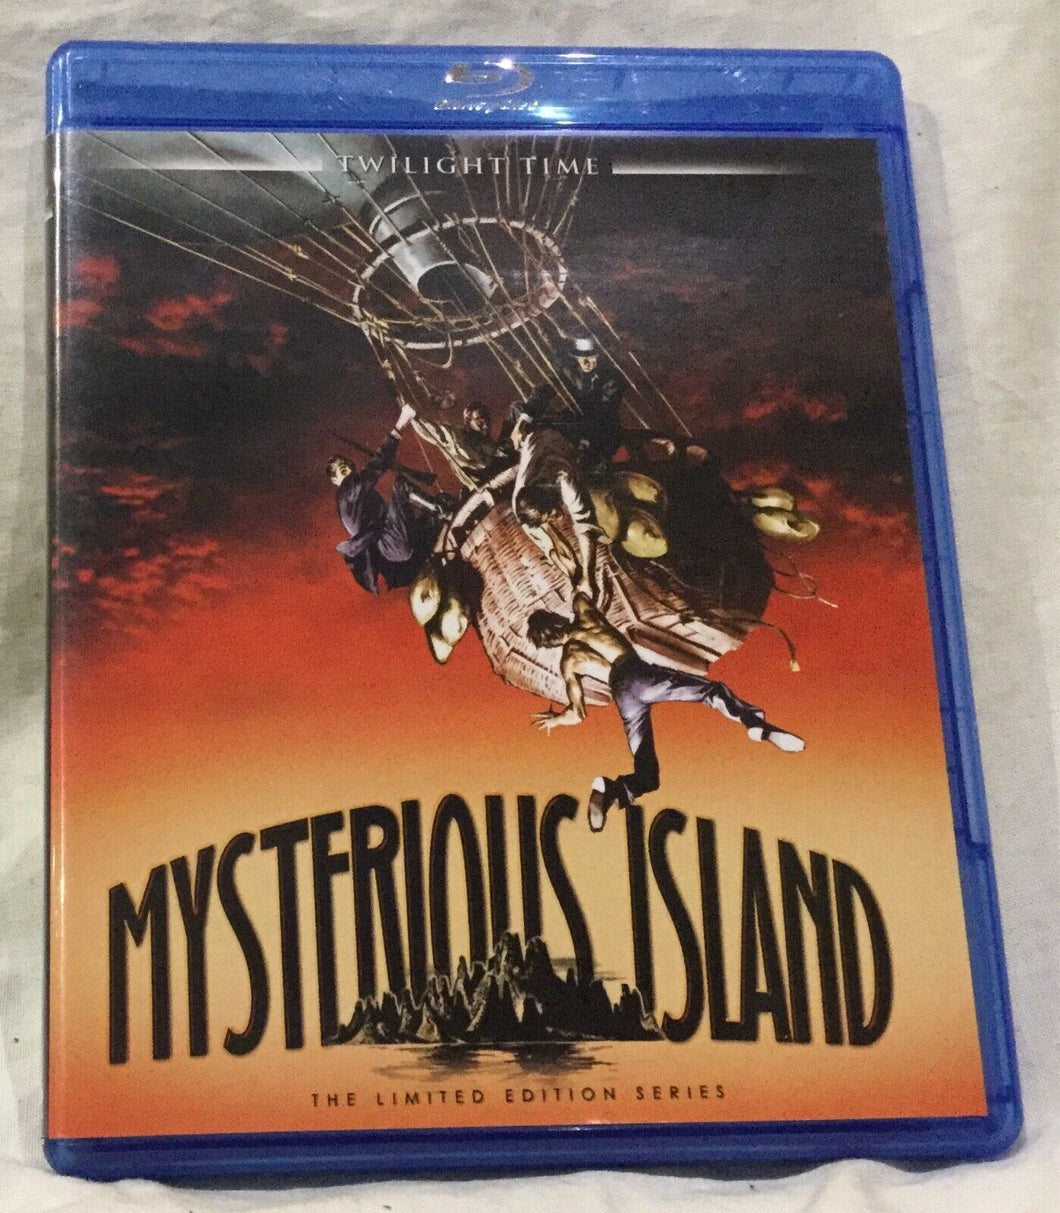 MYSTERIOUS ISLAND - TWILIGHT TIME LIMITED EDITION - BLU RAY